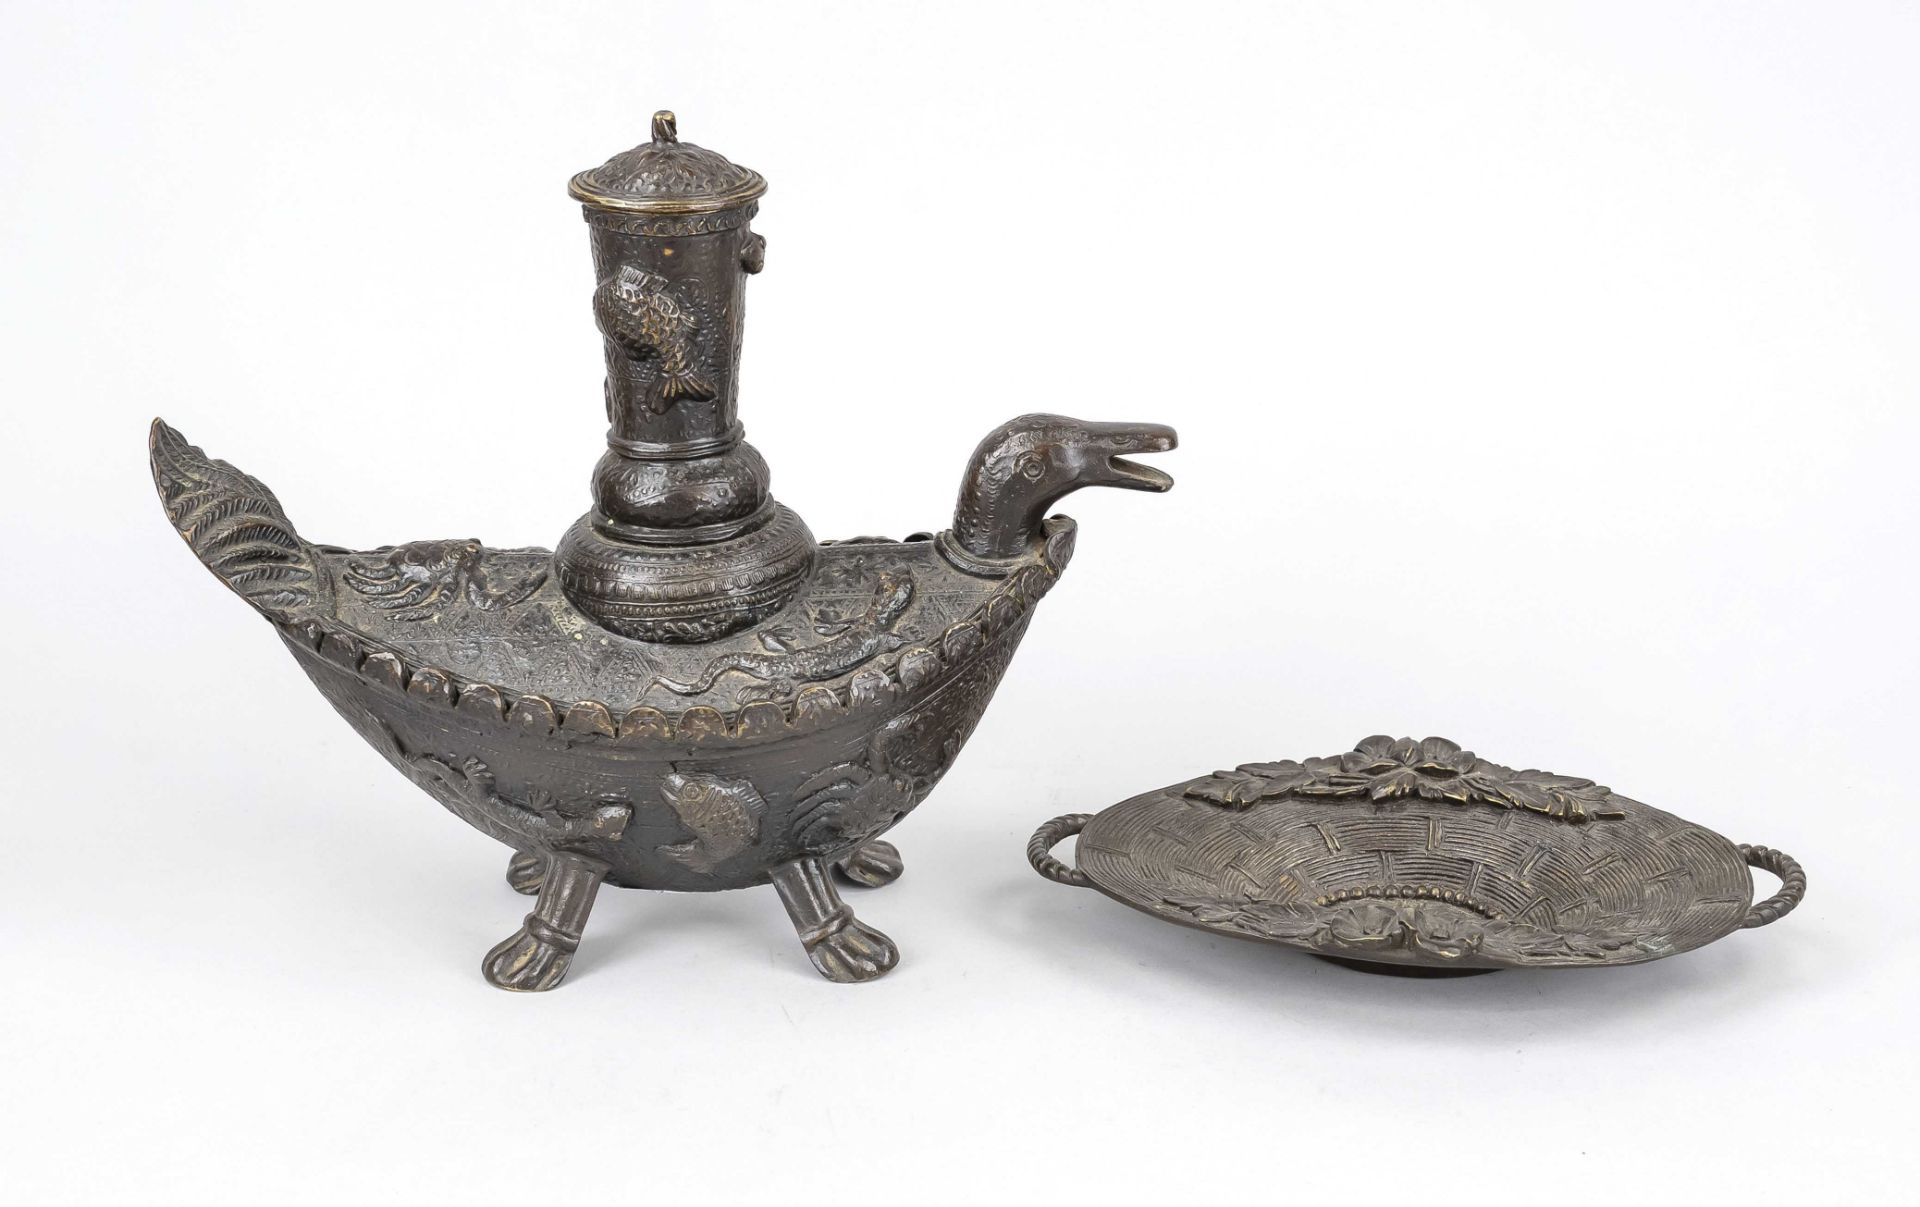 2 pieces bronze 19th/20th c. 1 x vessel in boat shape with duck head spout and relief decor with